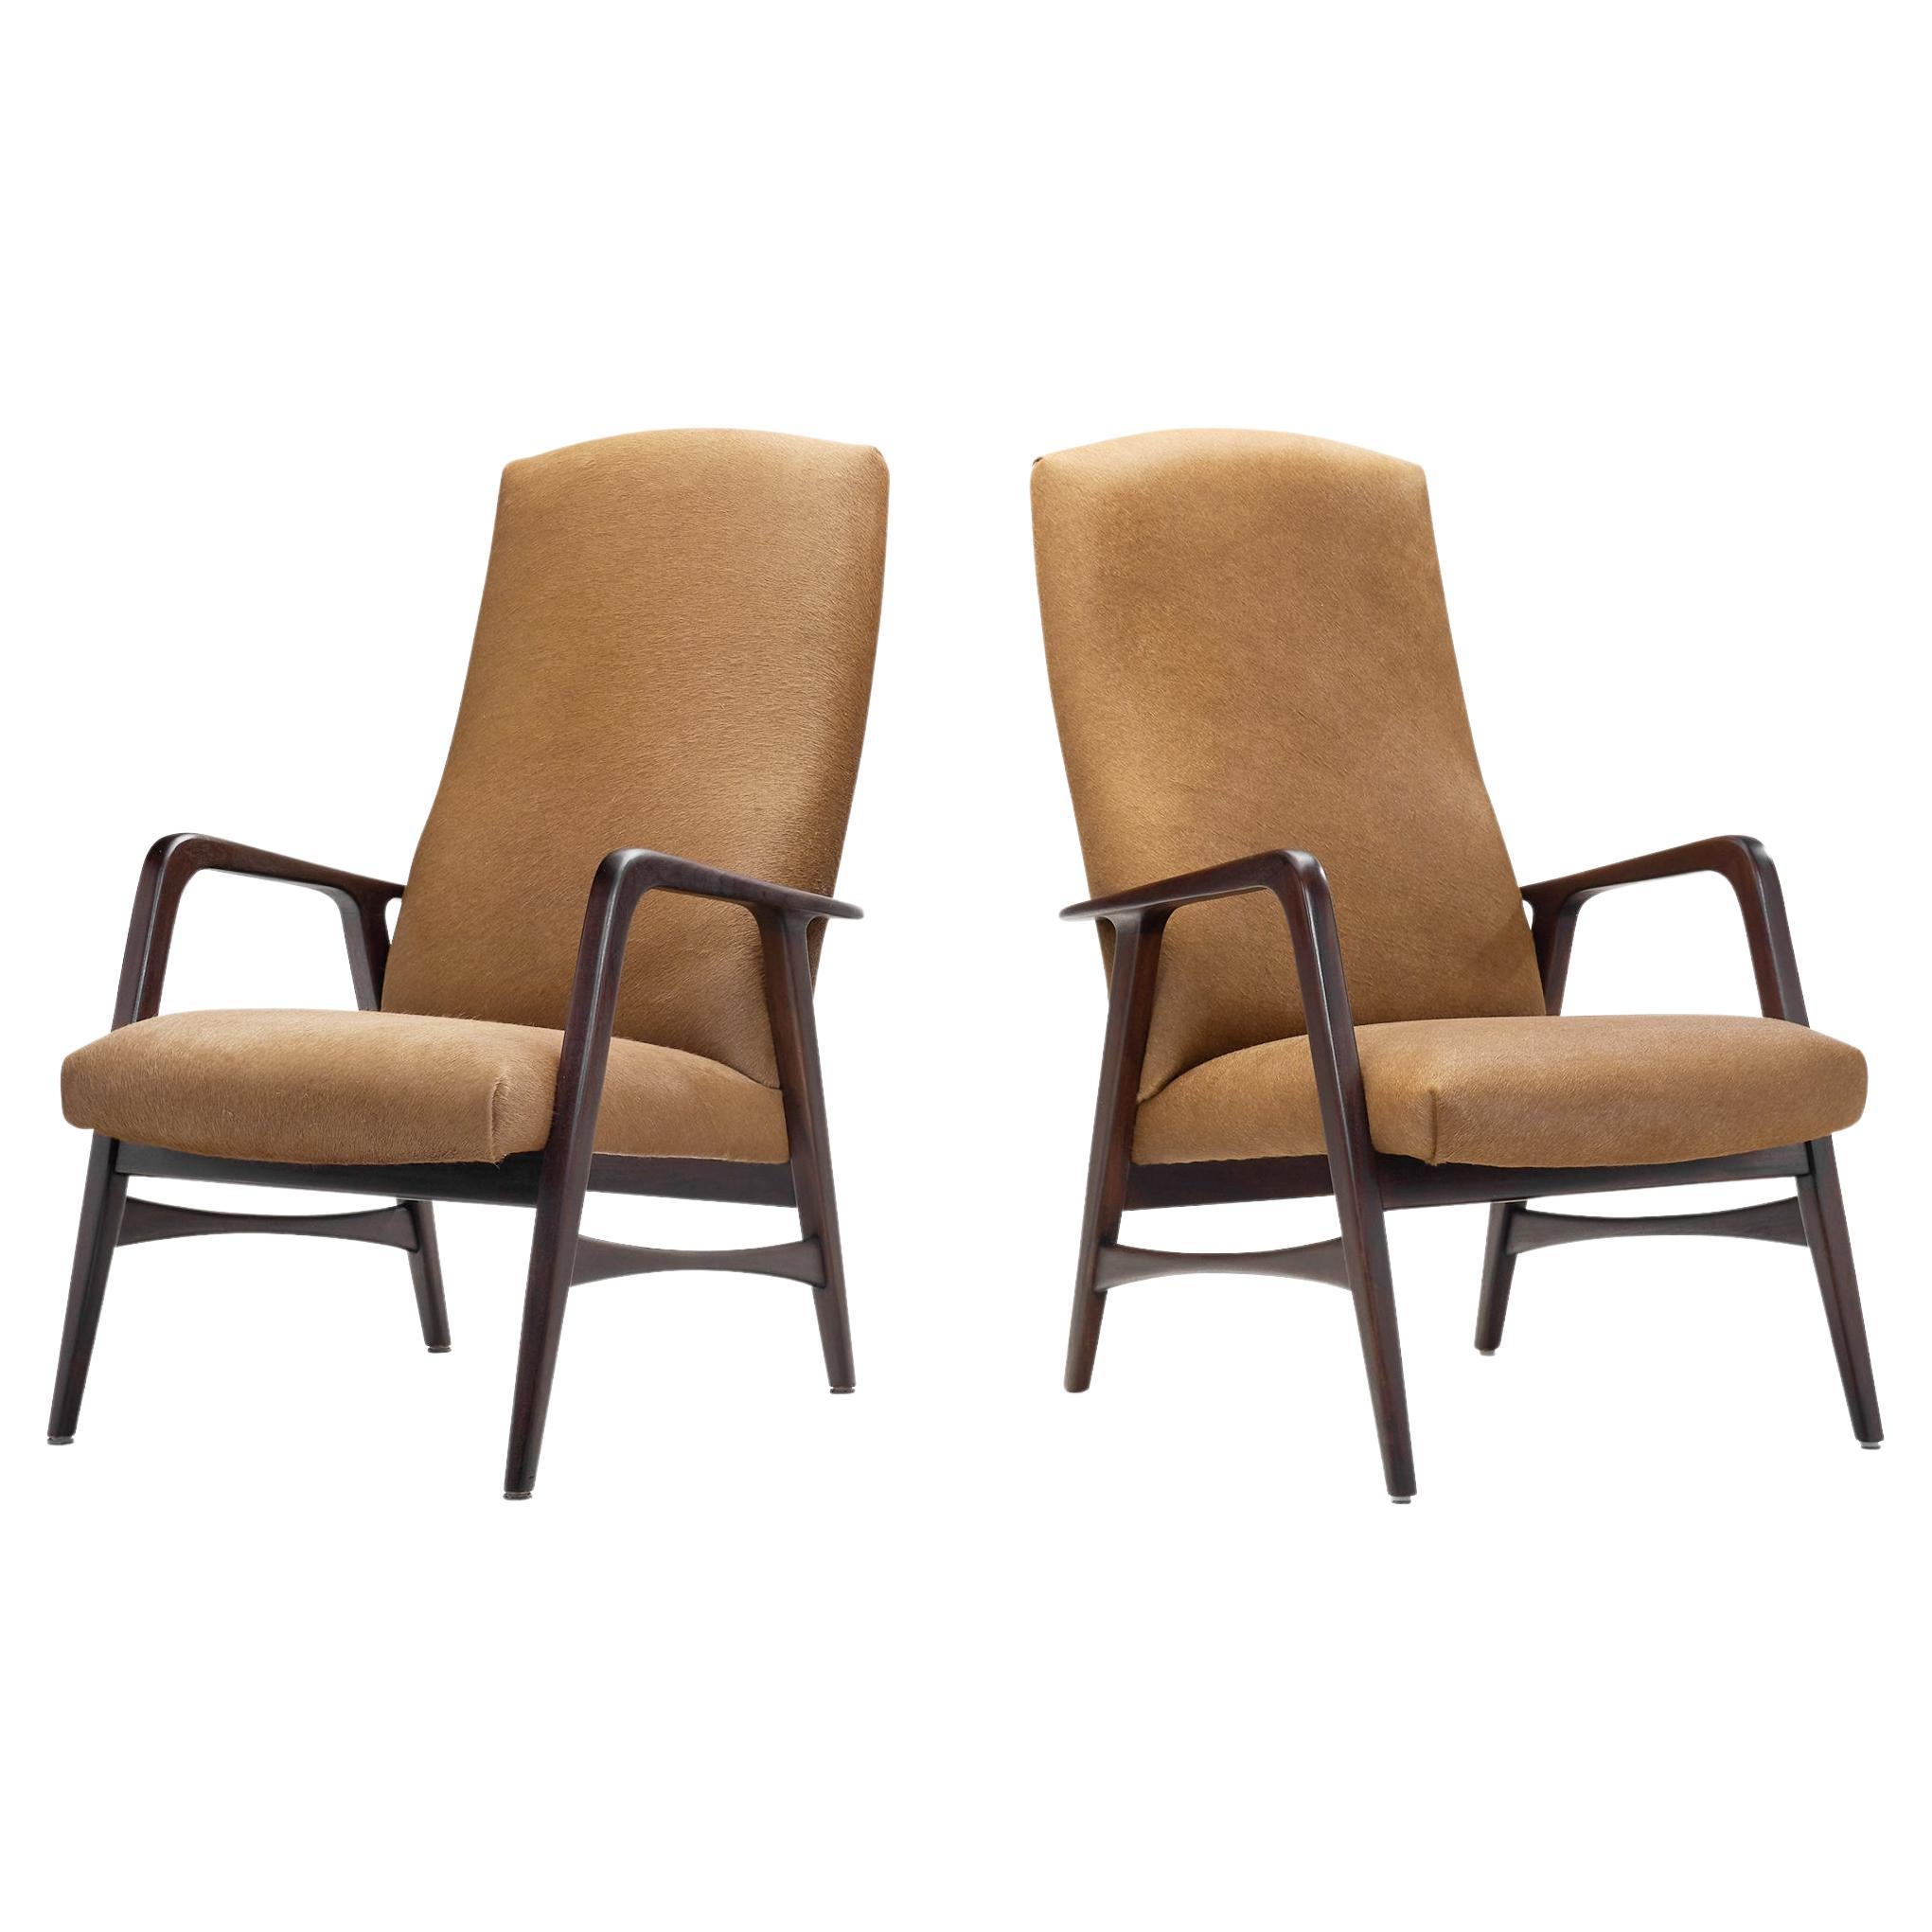 Danish Modern Lounge Chairs in Brown Cowhide, Denmark 1960s For Sale